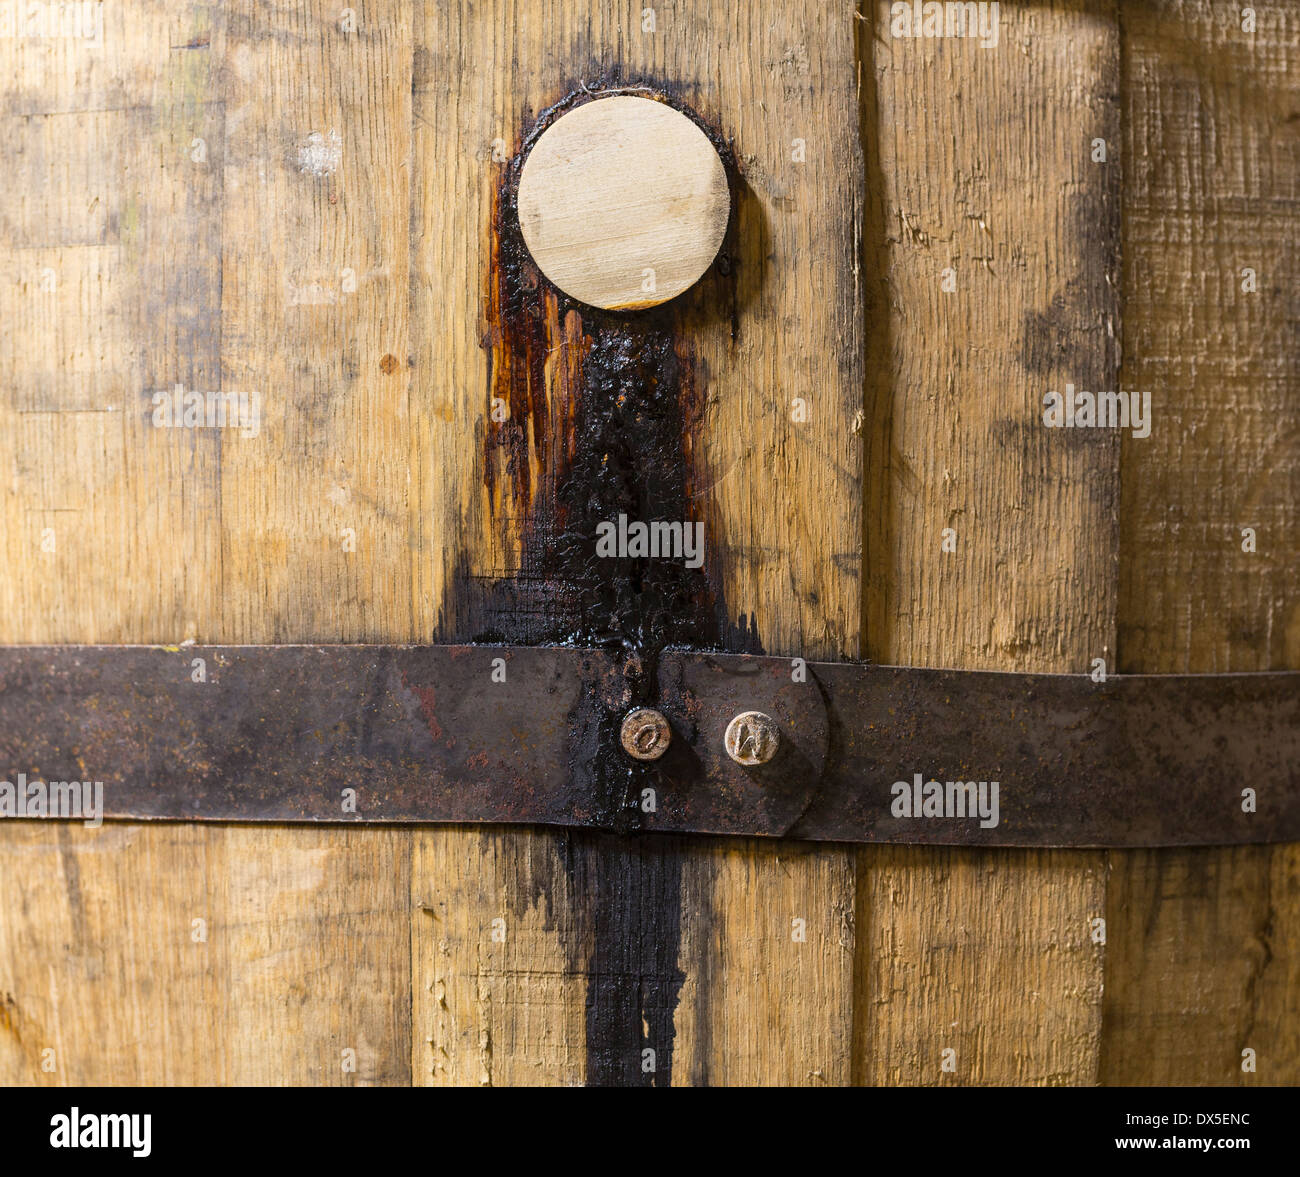 Wooden bung or cork in an old bourbon whisky barrel in a cellar Stock Photo